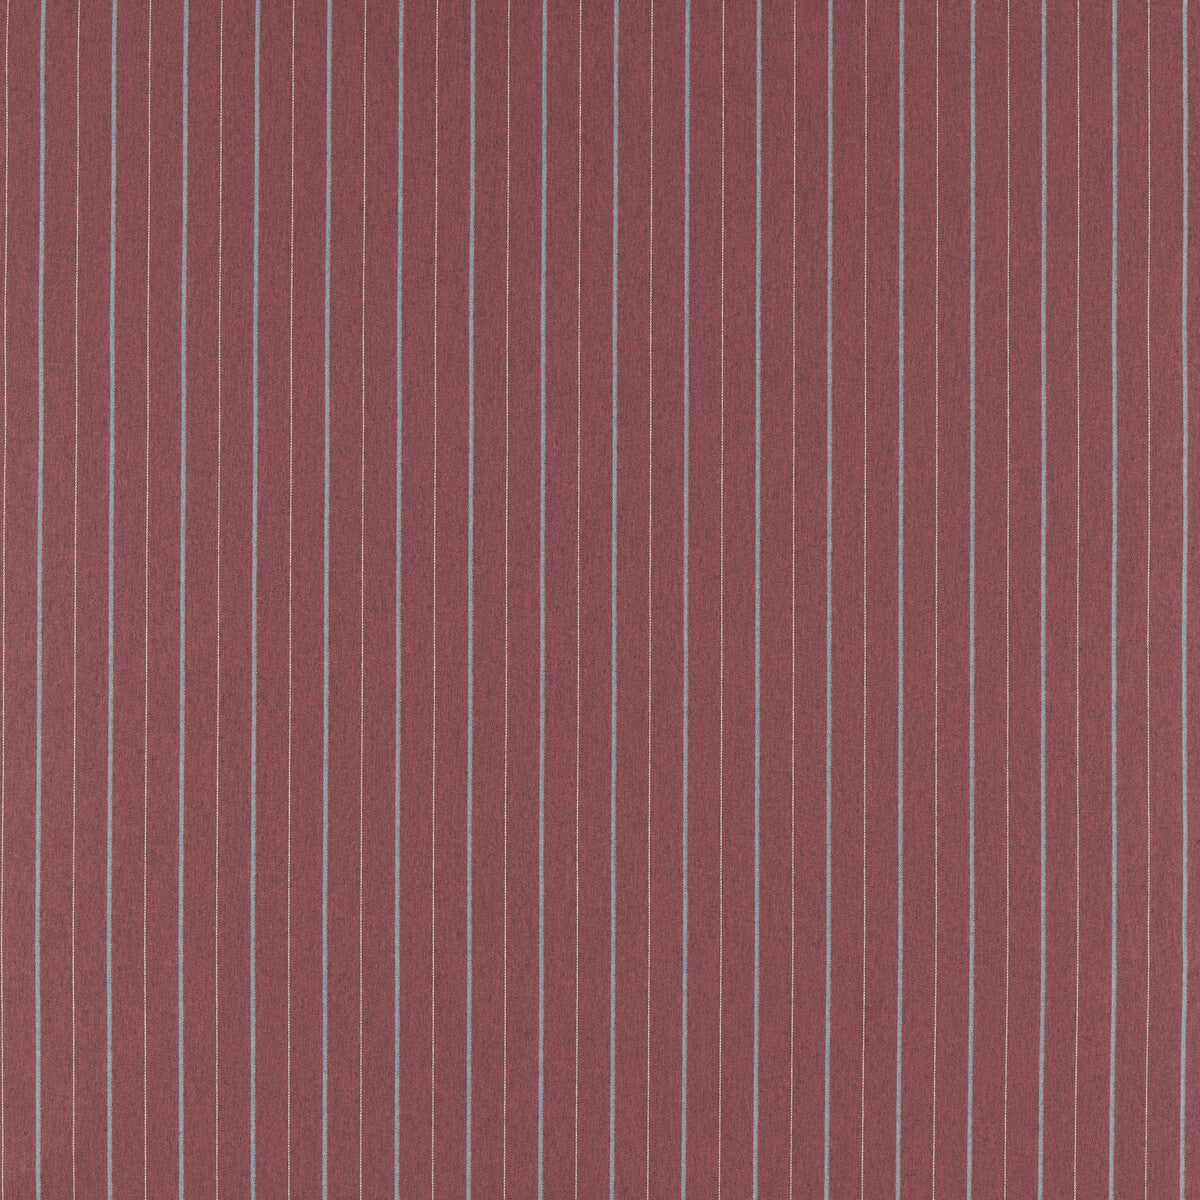 Bowmont fabric in cranberry color - pattern F1568/02.CAC.0 - by Clarke And Clarke in the Clarke &amp; Clarke Burlington collection